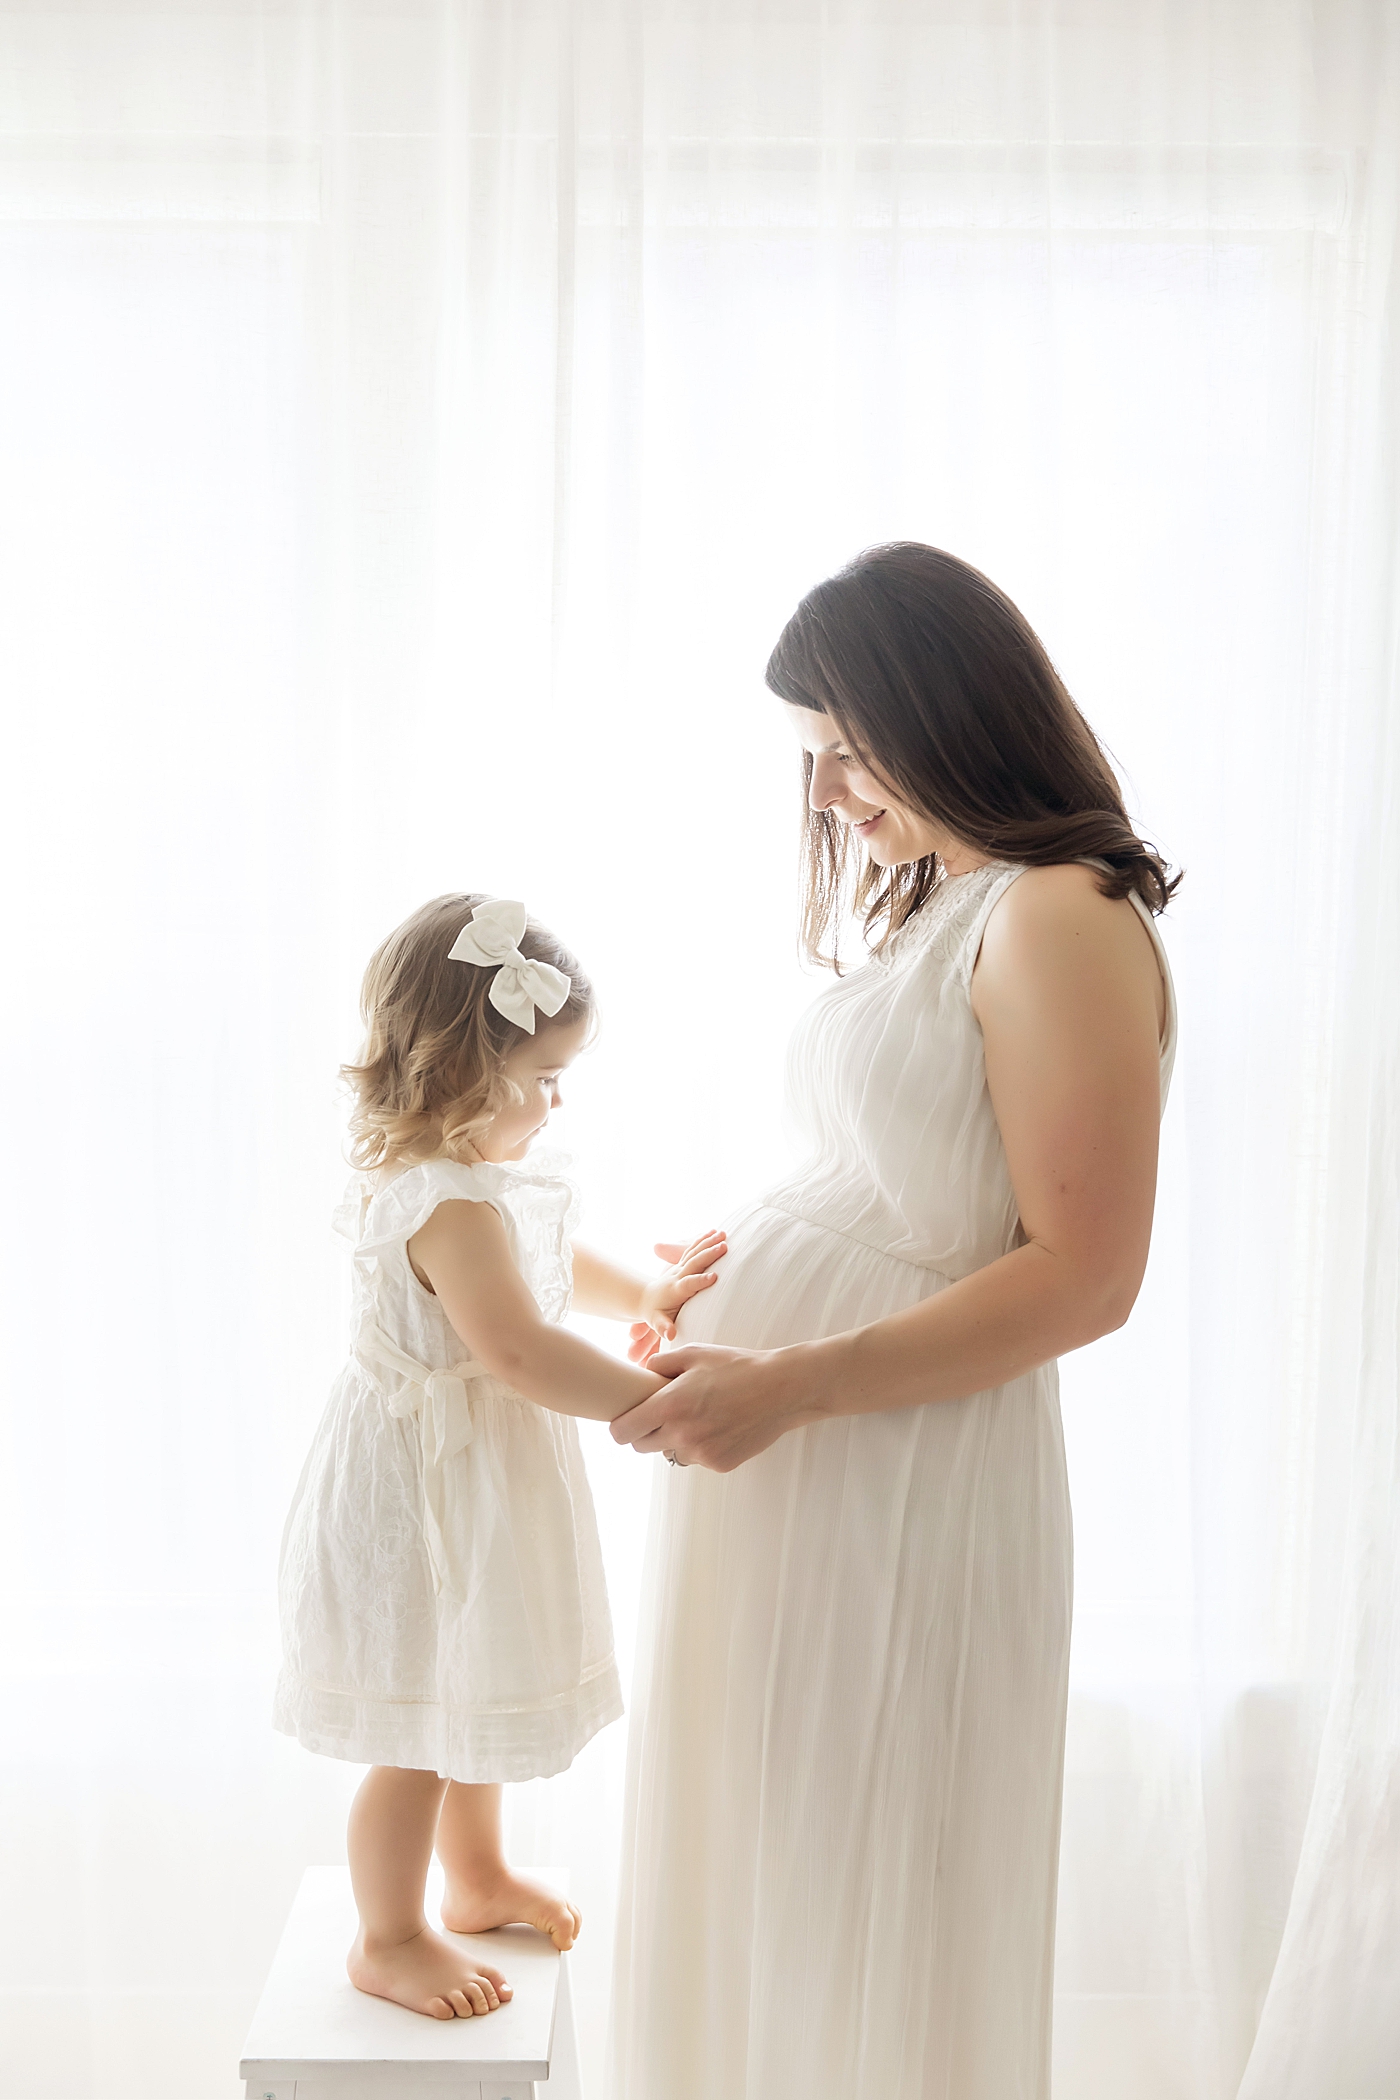 Big sister touching Mom's belly during maternity photoshoot | Fresh Light Photography